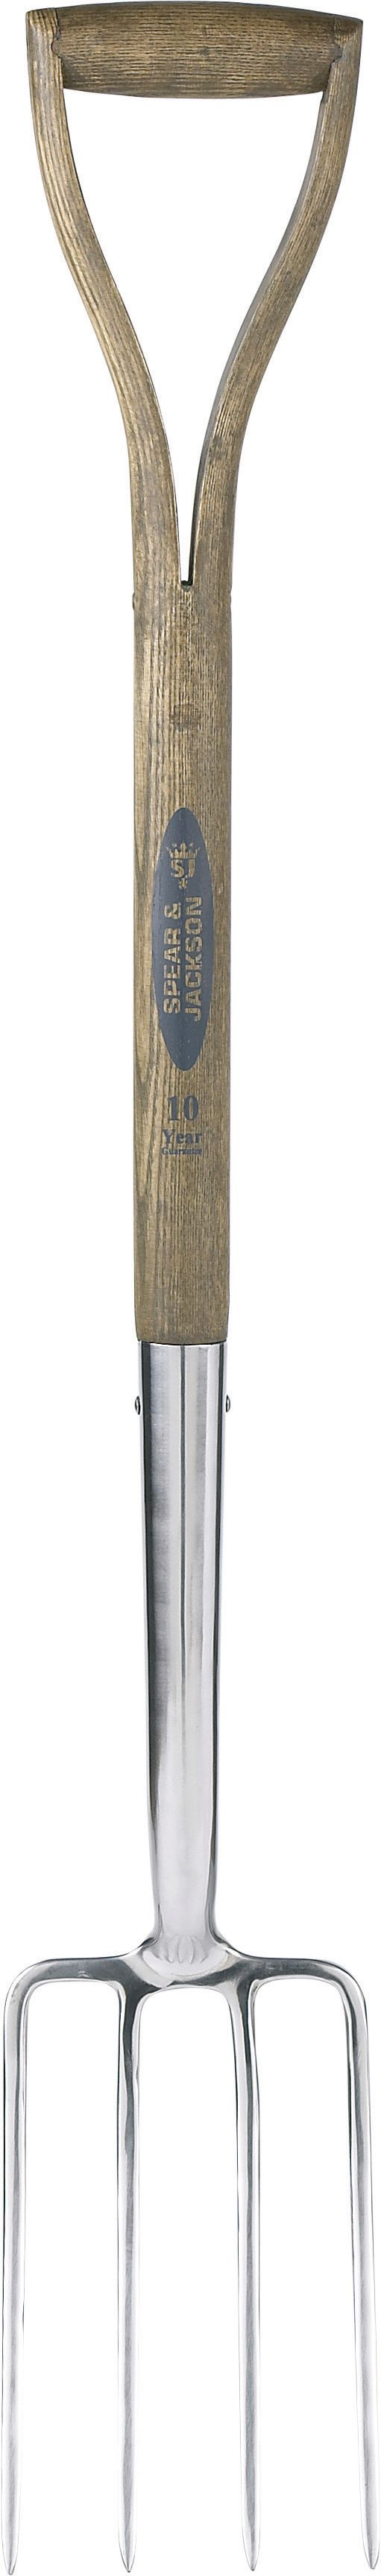 Image of Spear & Jackson Traditional Stainless Steel Border Fork